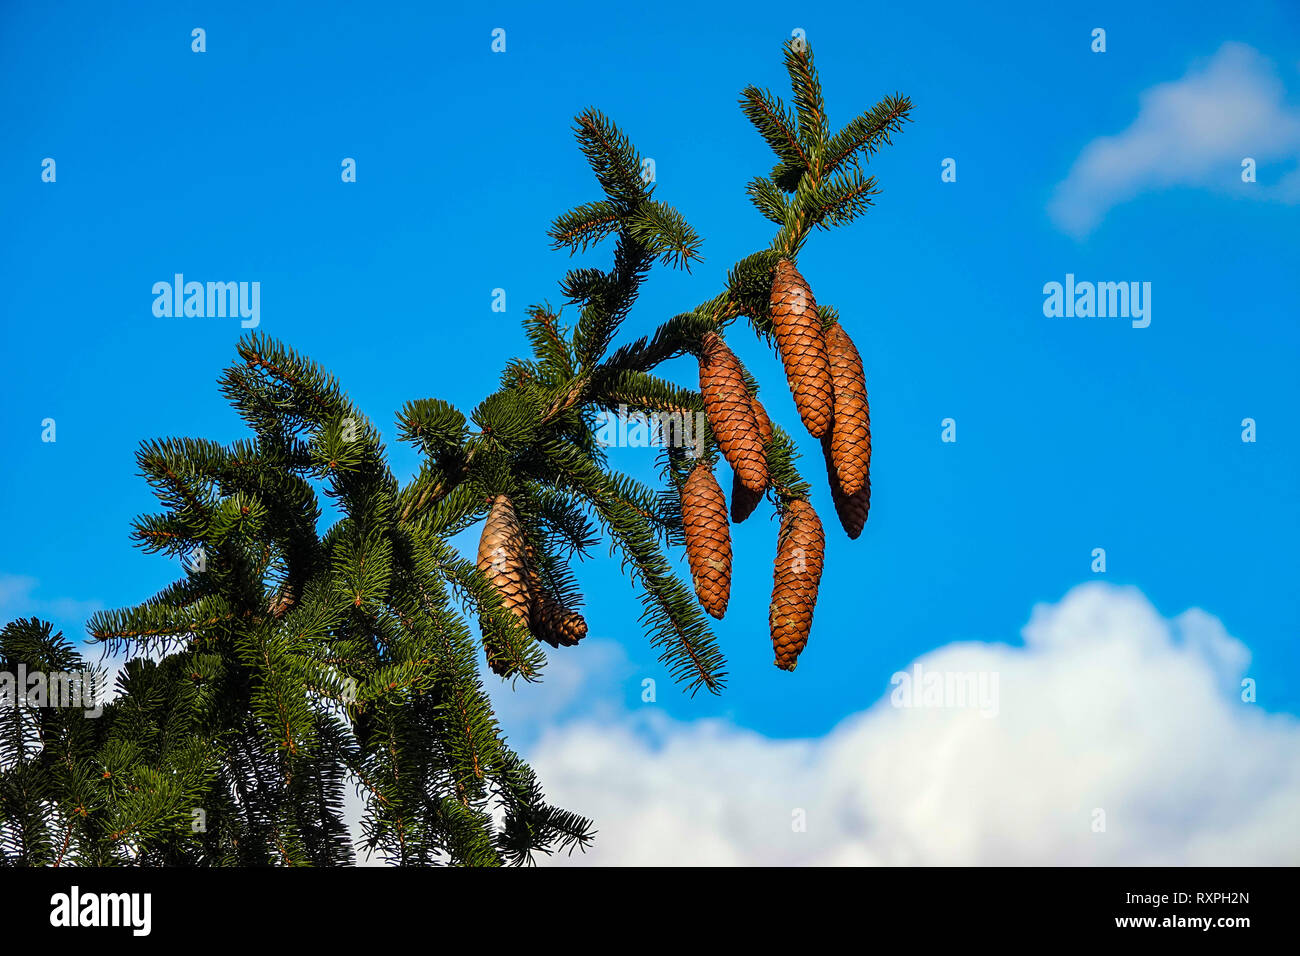 Brown fir cones on green Norway Spruce, Tarascon sur Ariege, Ariege, French Pyrenees, Pyrenees, France, EU Stock Photo